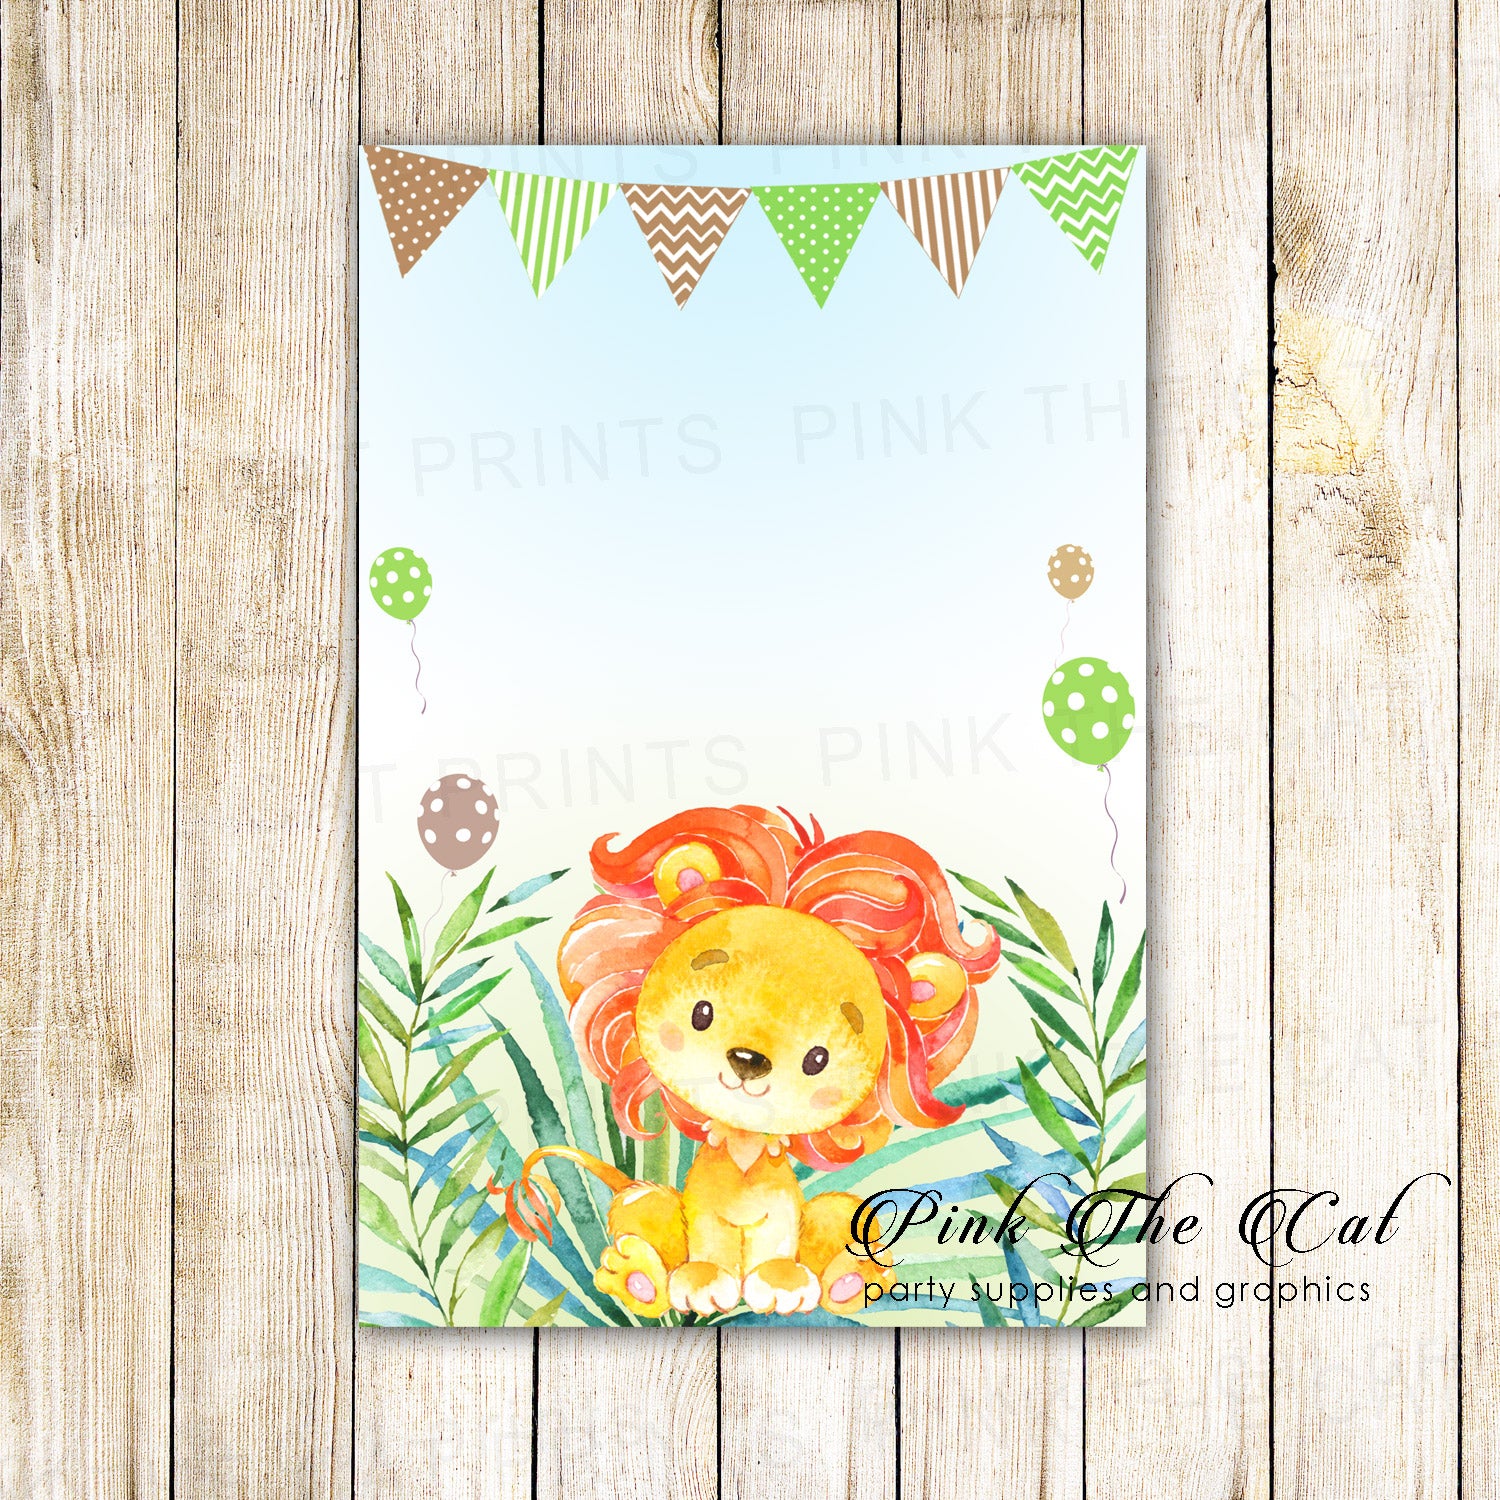 30 thank you cards invitations lion cub baby shower birthday